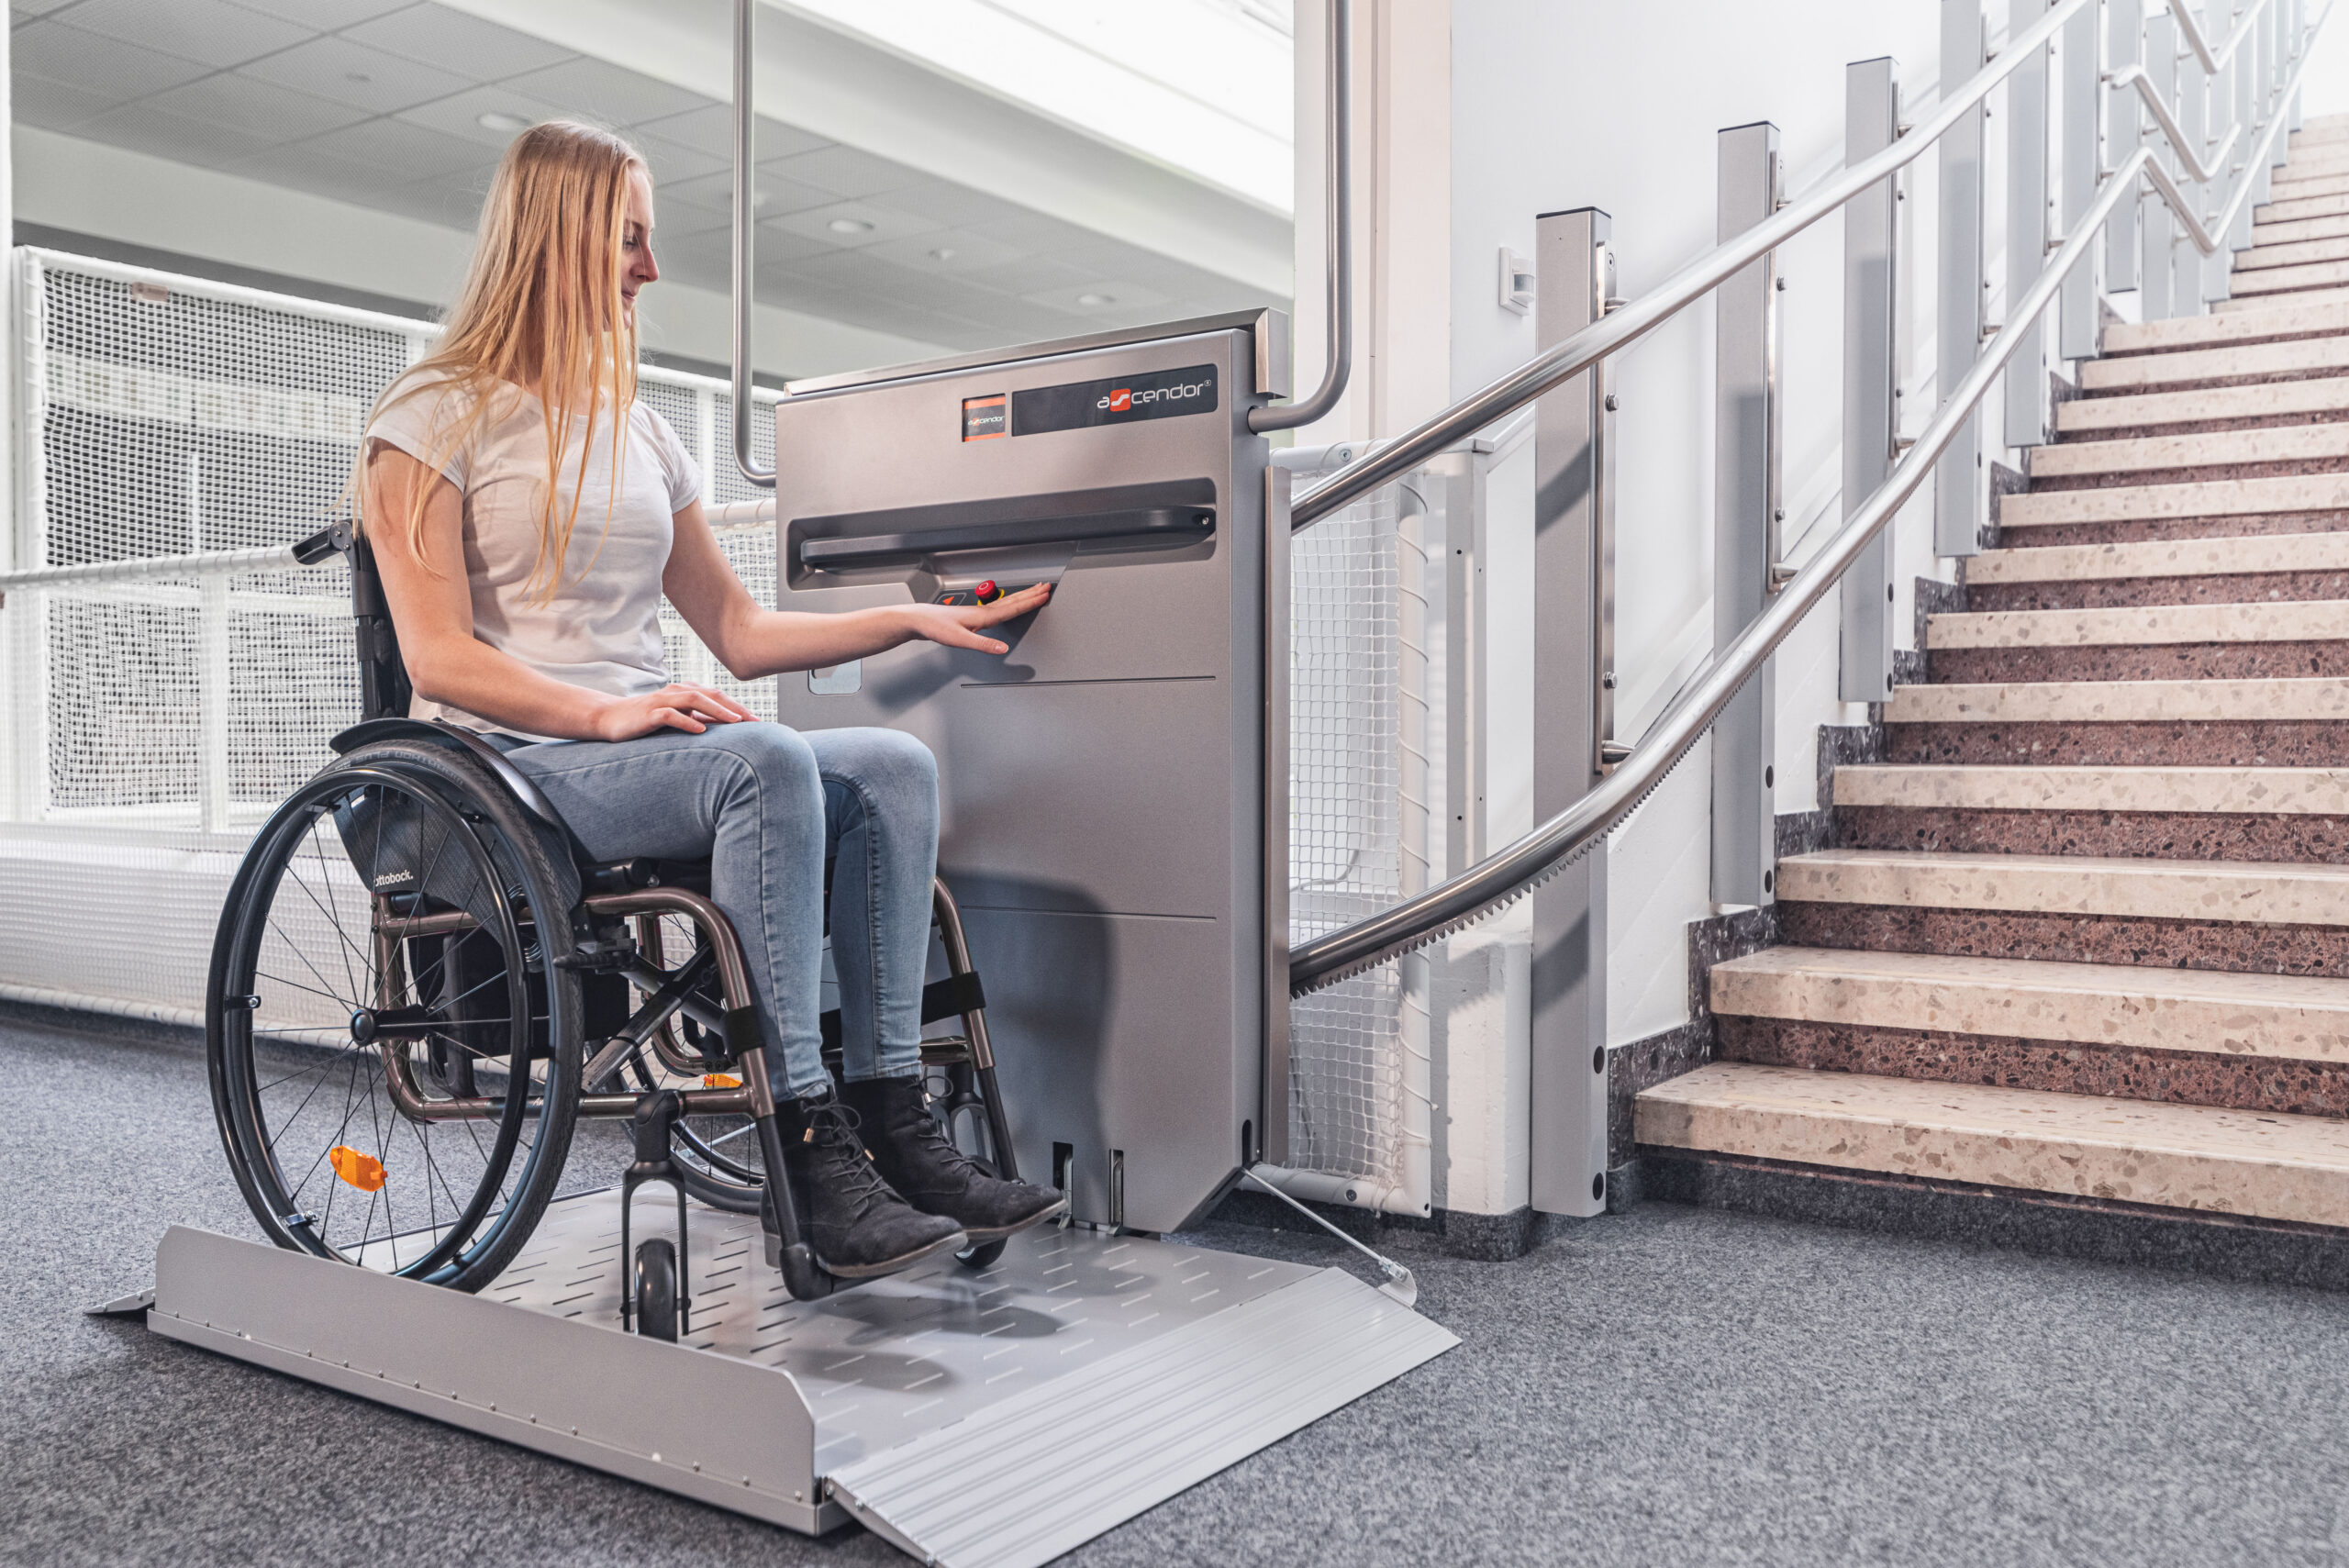 Optimum 200 stairlift is a game changer @Abilityltd